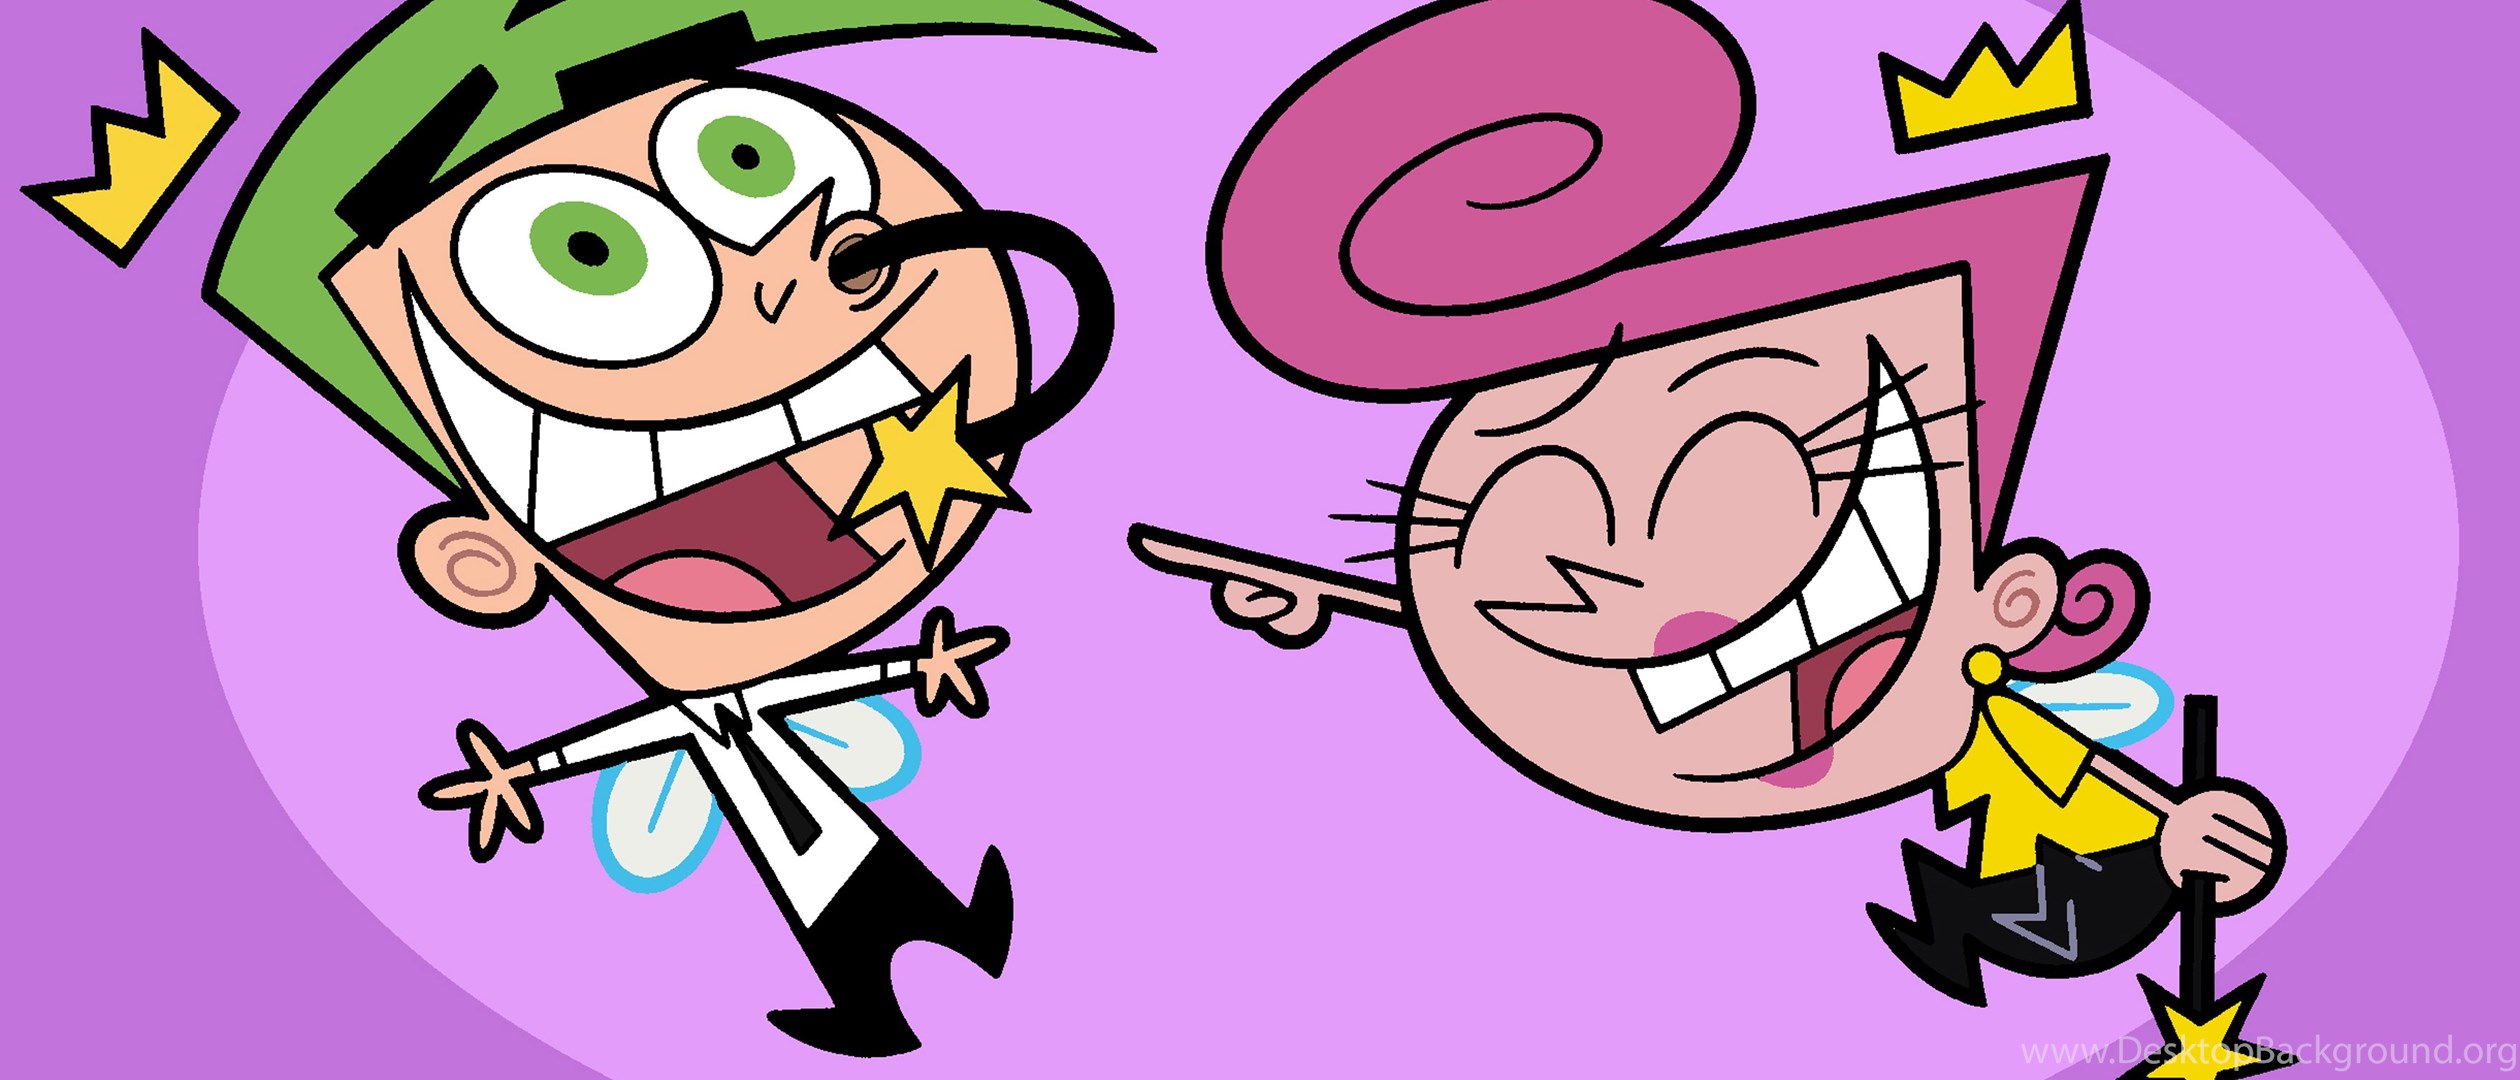 Download The Fairly Oddparents Fr Wallpapers Widescreen Wide 21:9 2520x1080...